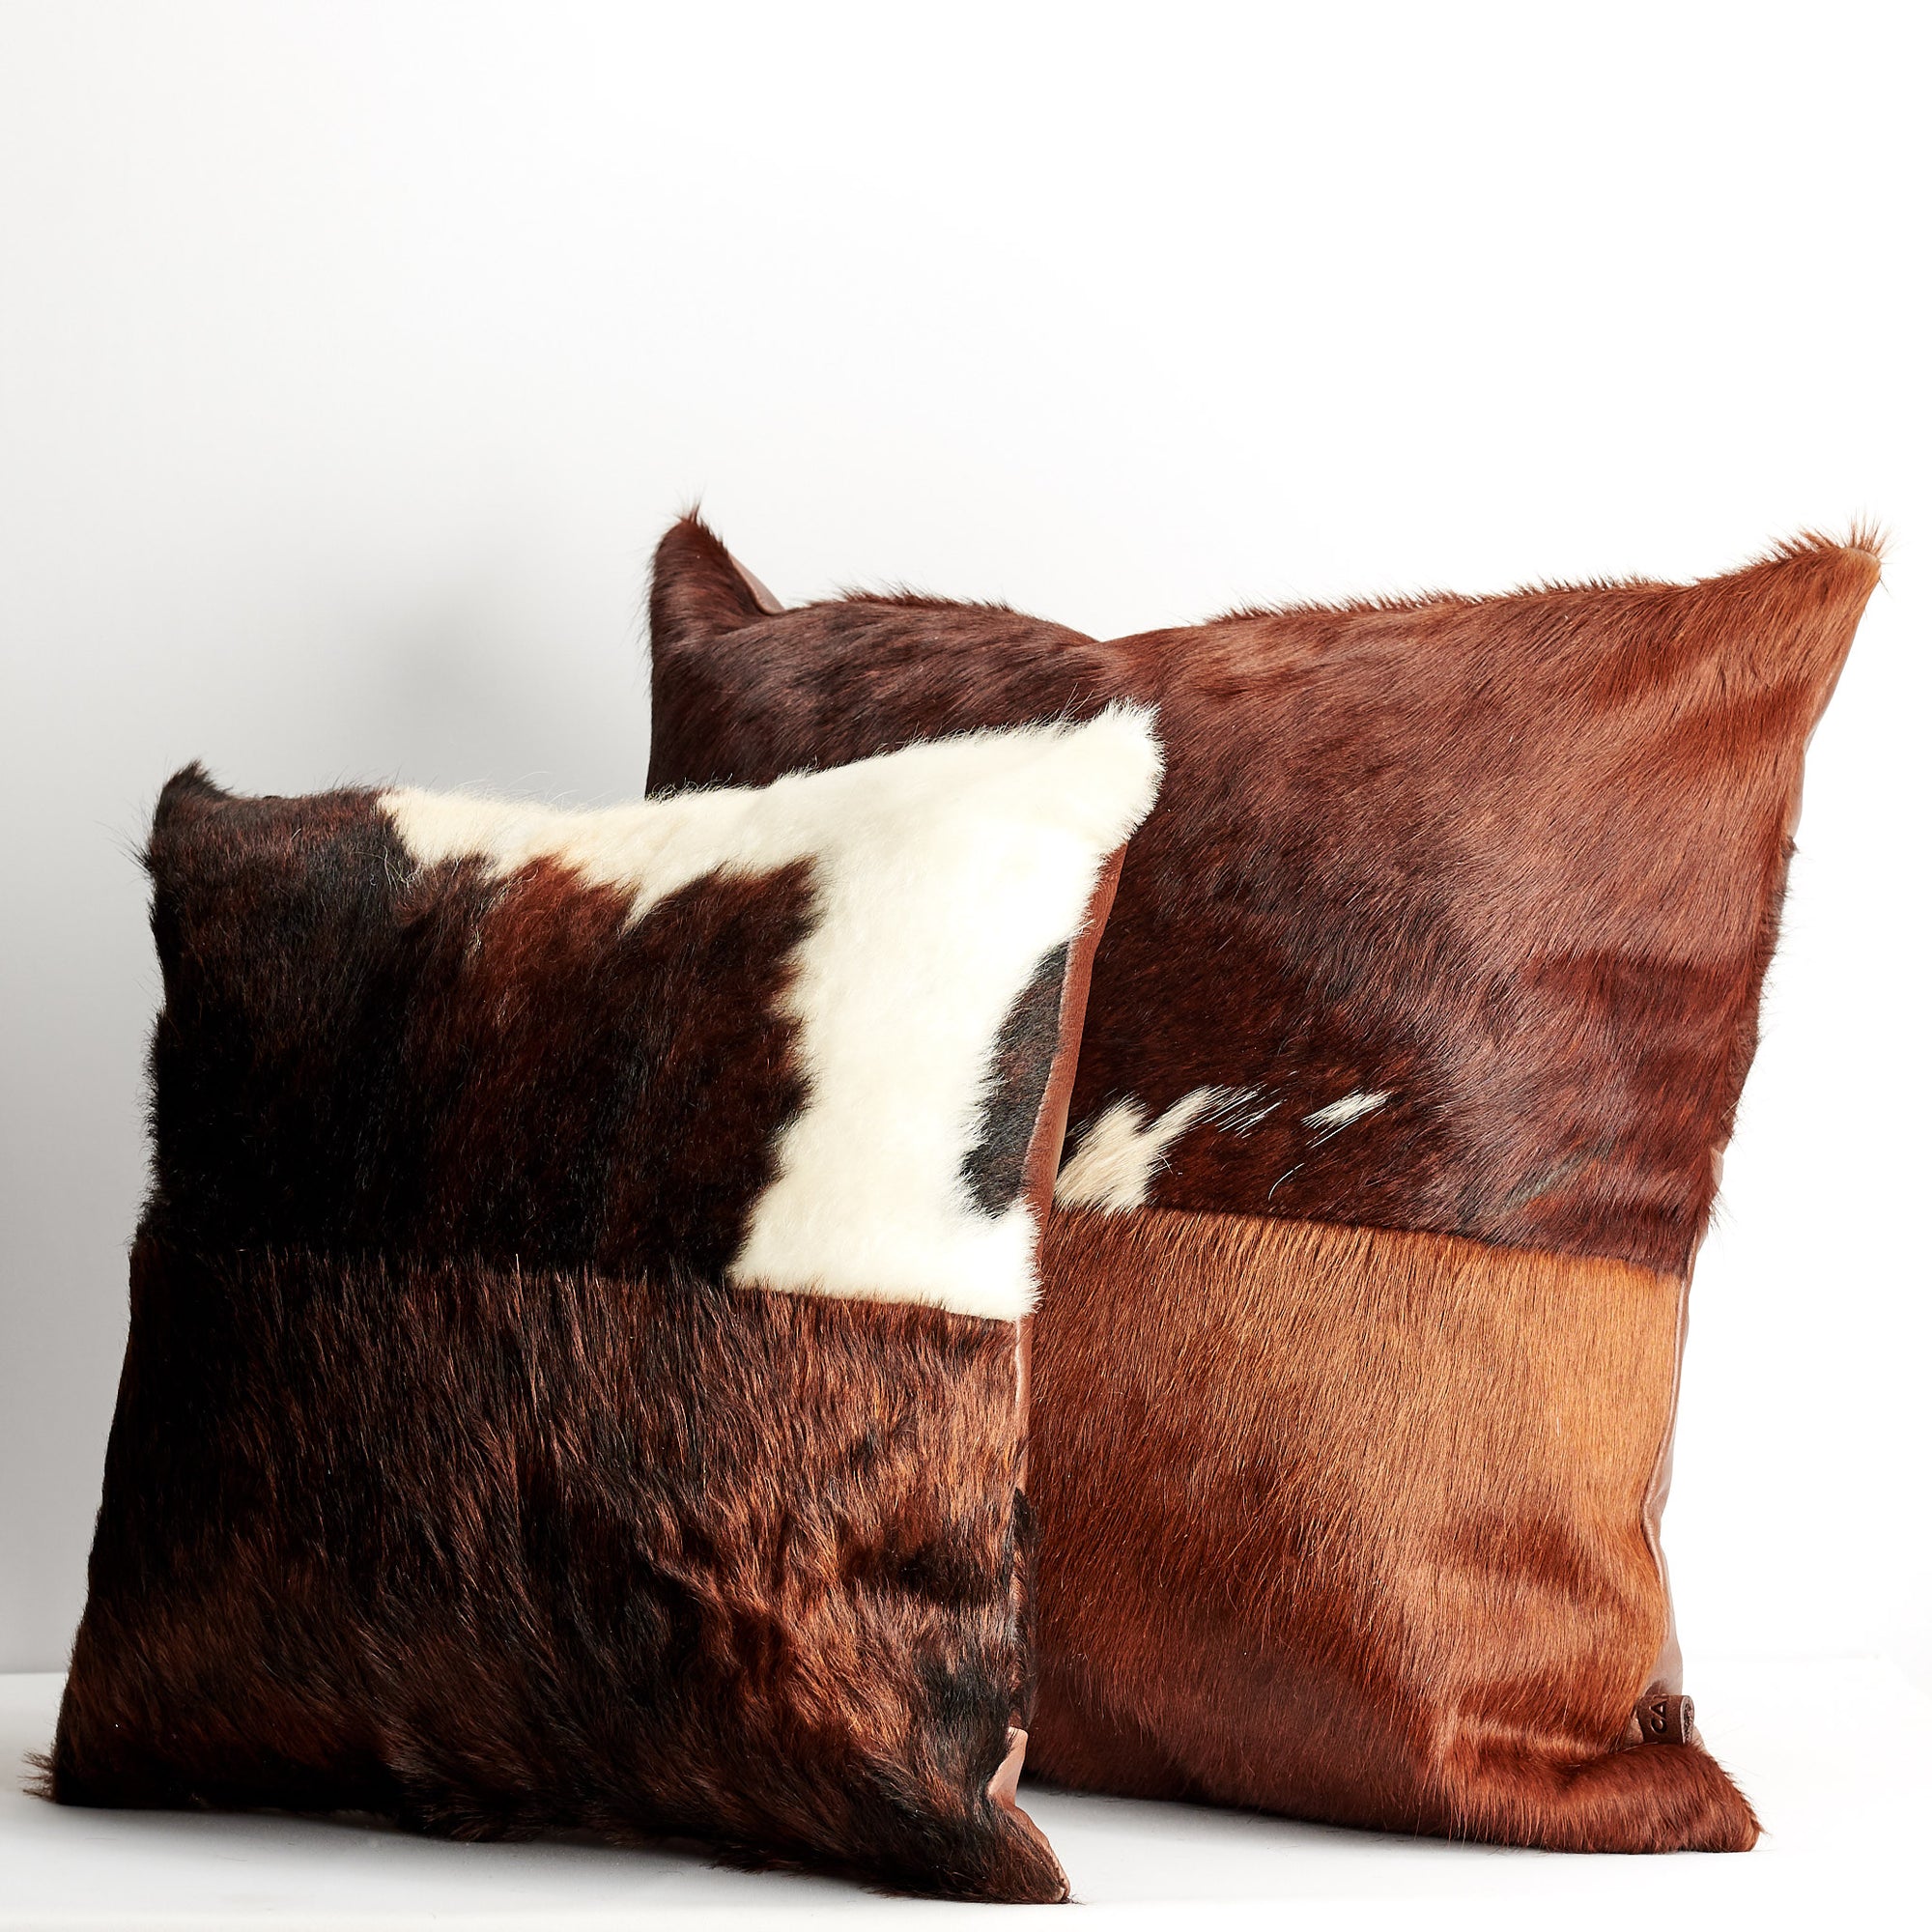 Big small cushion. Brown Dual Leather Cowhide Cushion. Couch decoration, lounge, bench, sofa cushion covers, custom size, pillow. 